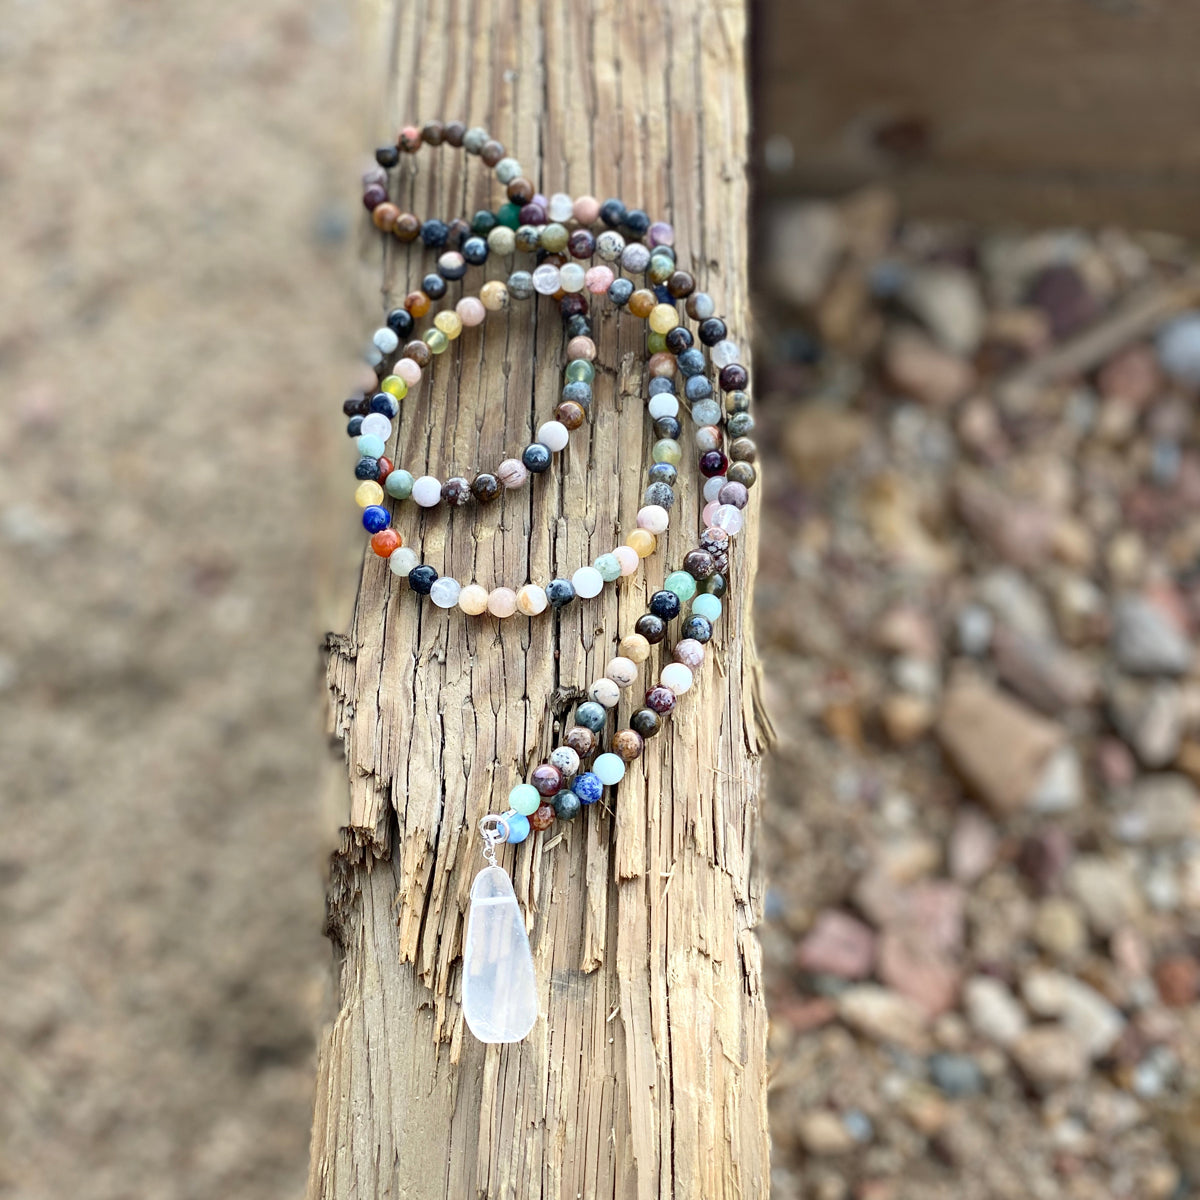 Connect with Mother Earth - Mindfulness Chakra Wrap Bracelet and Necklace Set with Healing Stones